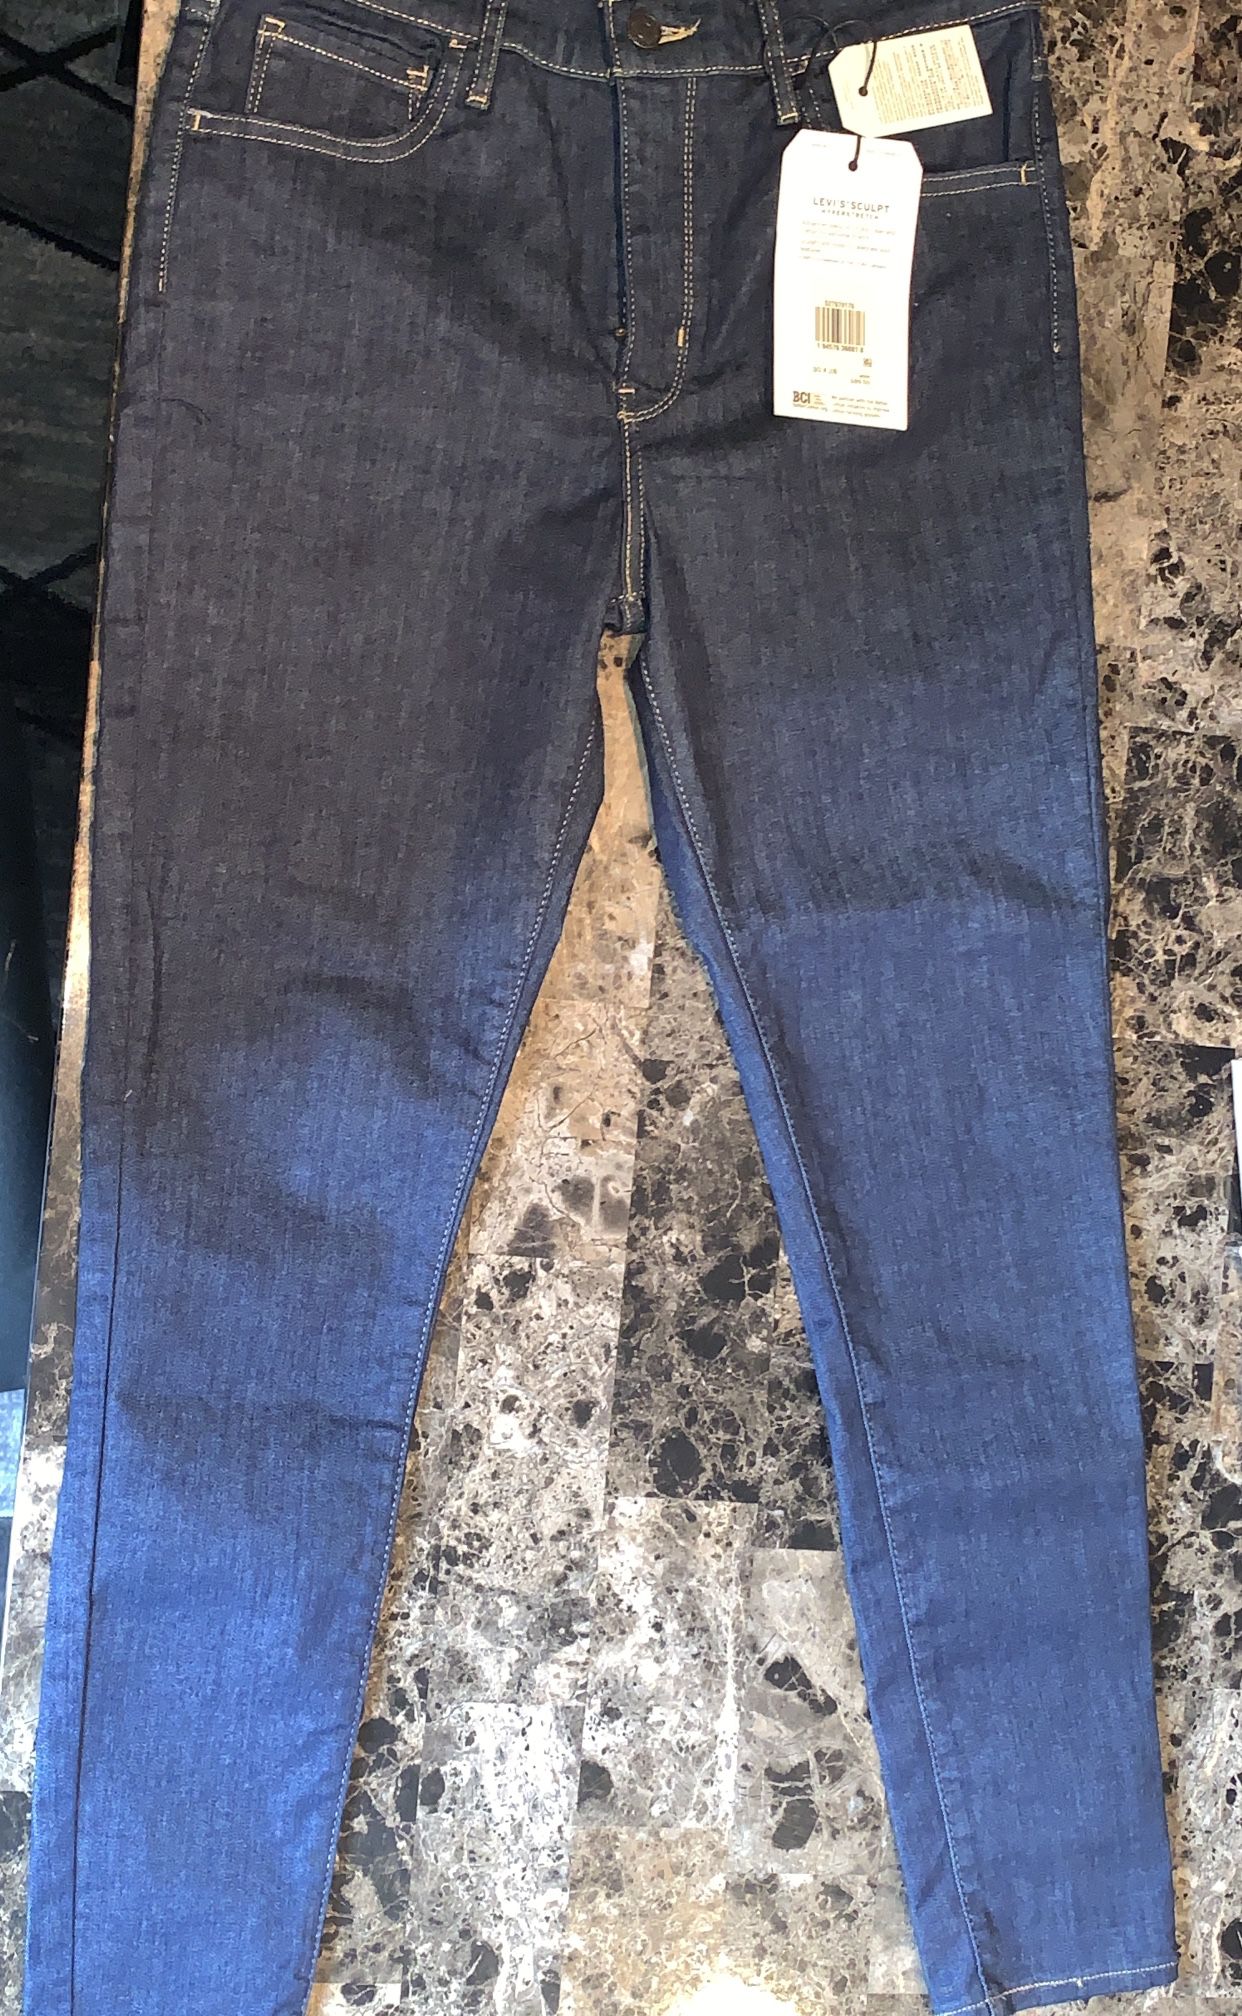 Levis For Sale for Sale in Albuquerque, NM - OfferUp